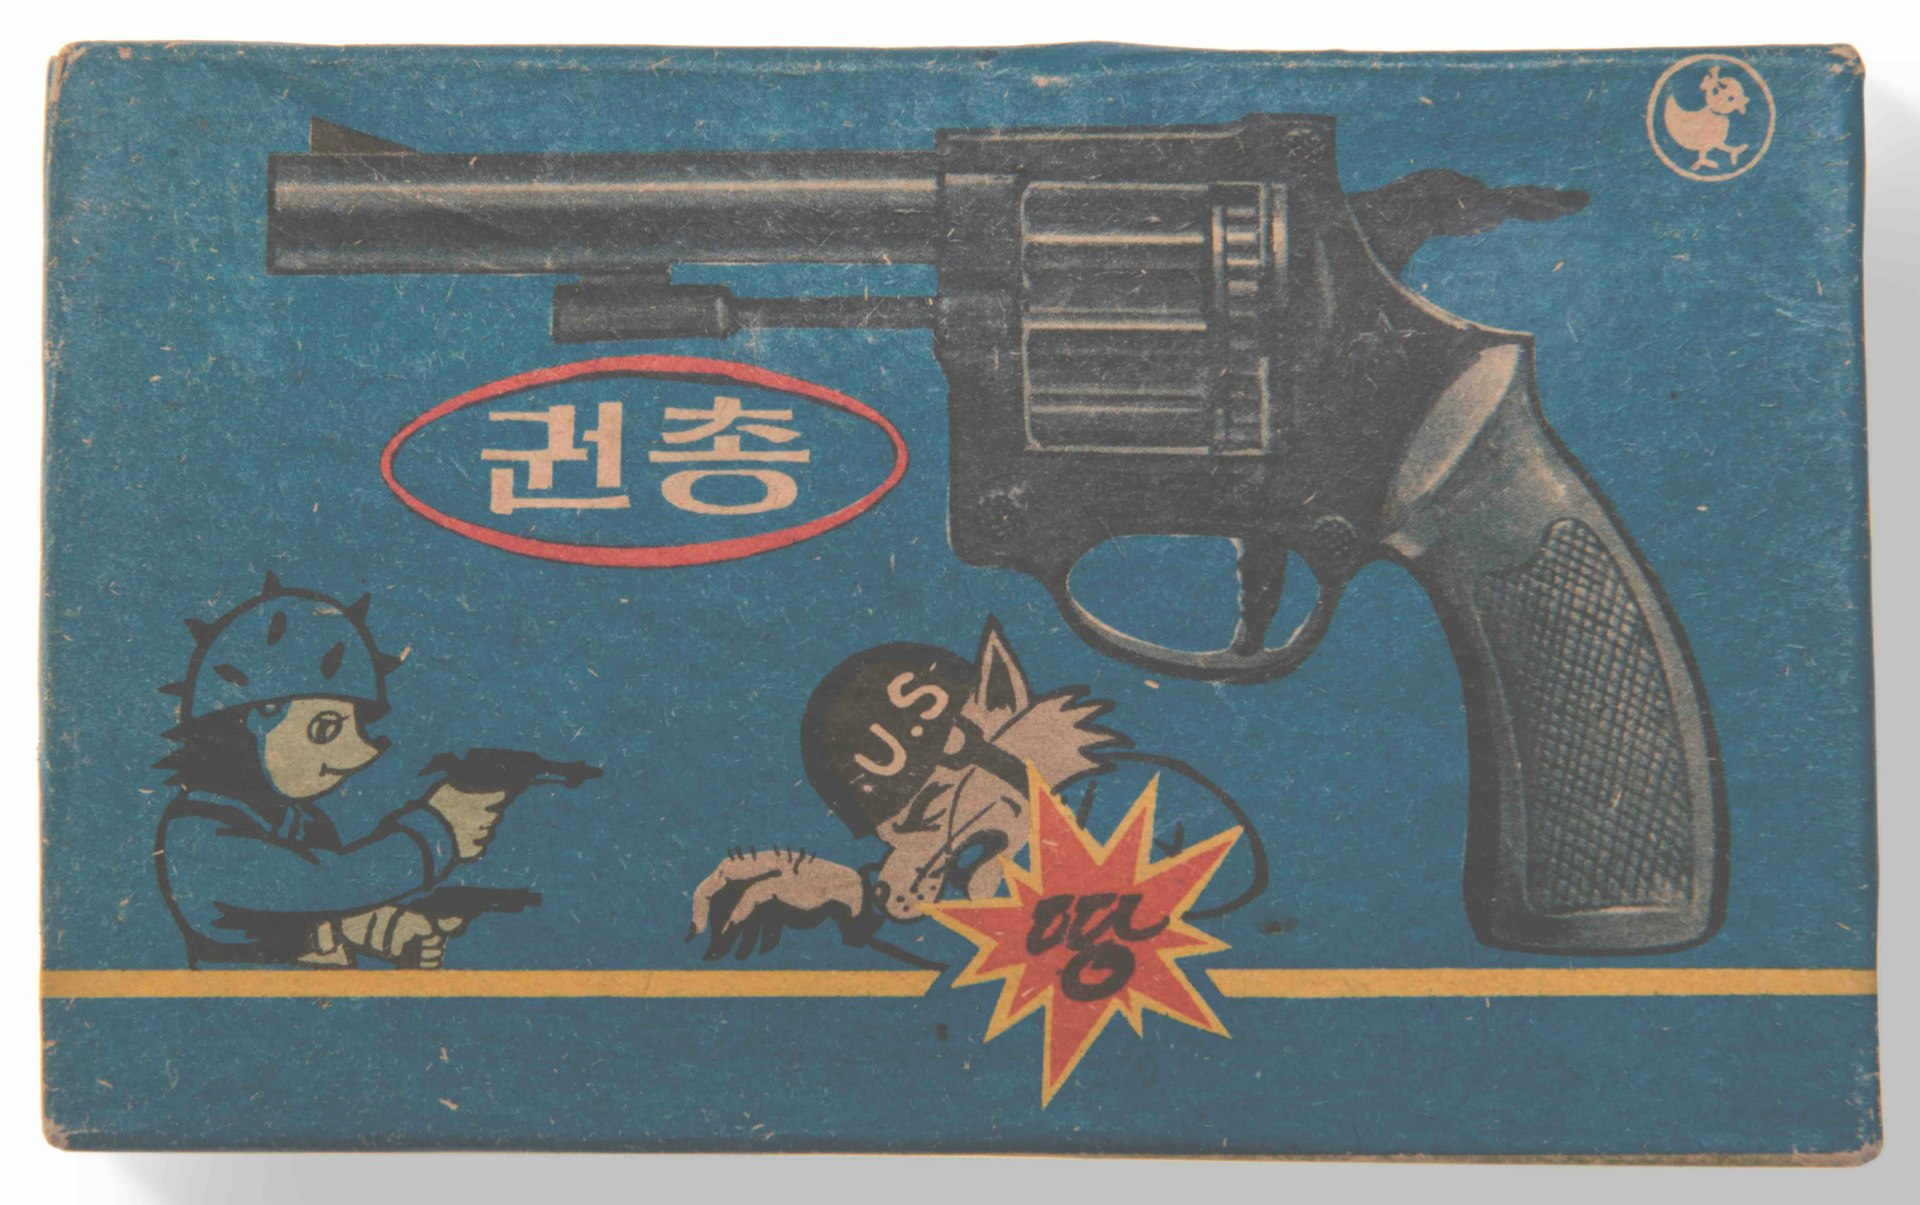 Box for a locally made toy gun that fires plastic bullets. The gun features the Korean Army slogan ‘Il Tang Paek’ meaning ‘one is the match for one hundred (enemies)’. The hedgehog is a popular cartoon character (representing the Korean hero) fighting the wolf and the weasel (representing the enemy  - the Americans). 